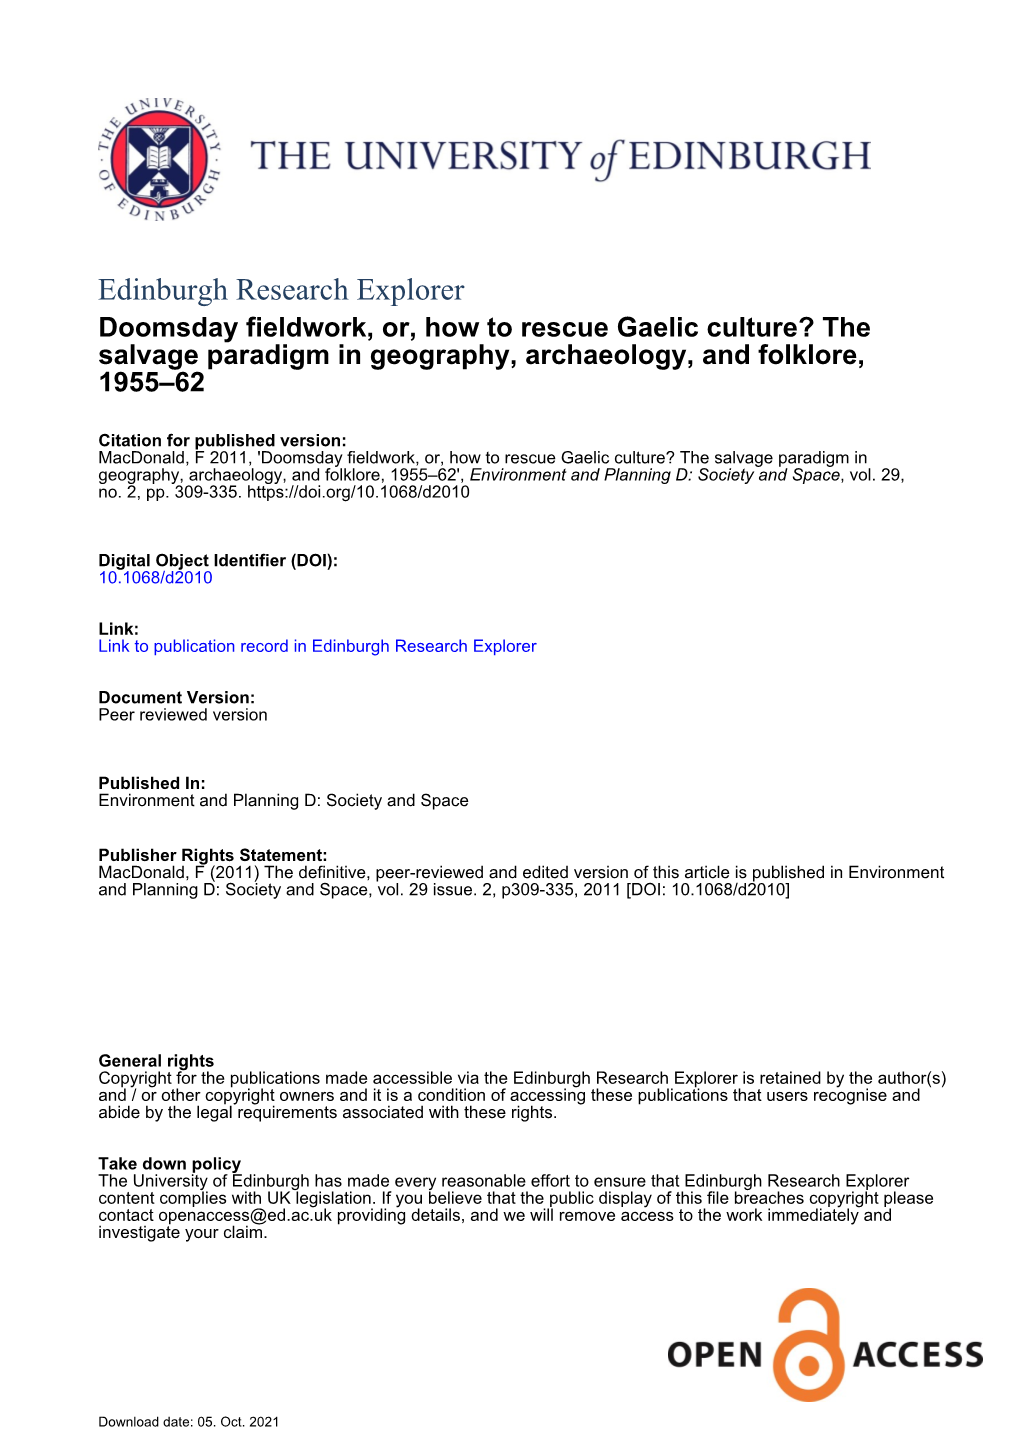 Doomsday Fieldwork, Or, How to Rescue Gaelic Culture? the Salvage Paradigm in Geography, Archaeology, and Folklore